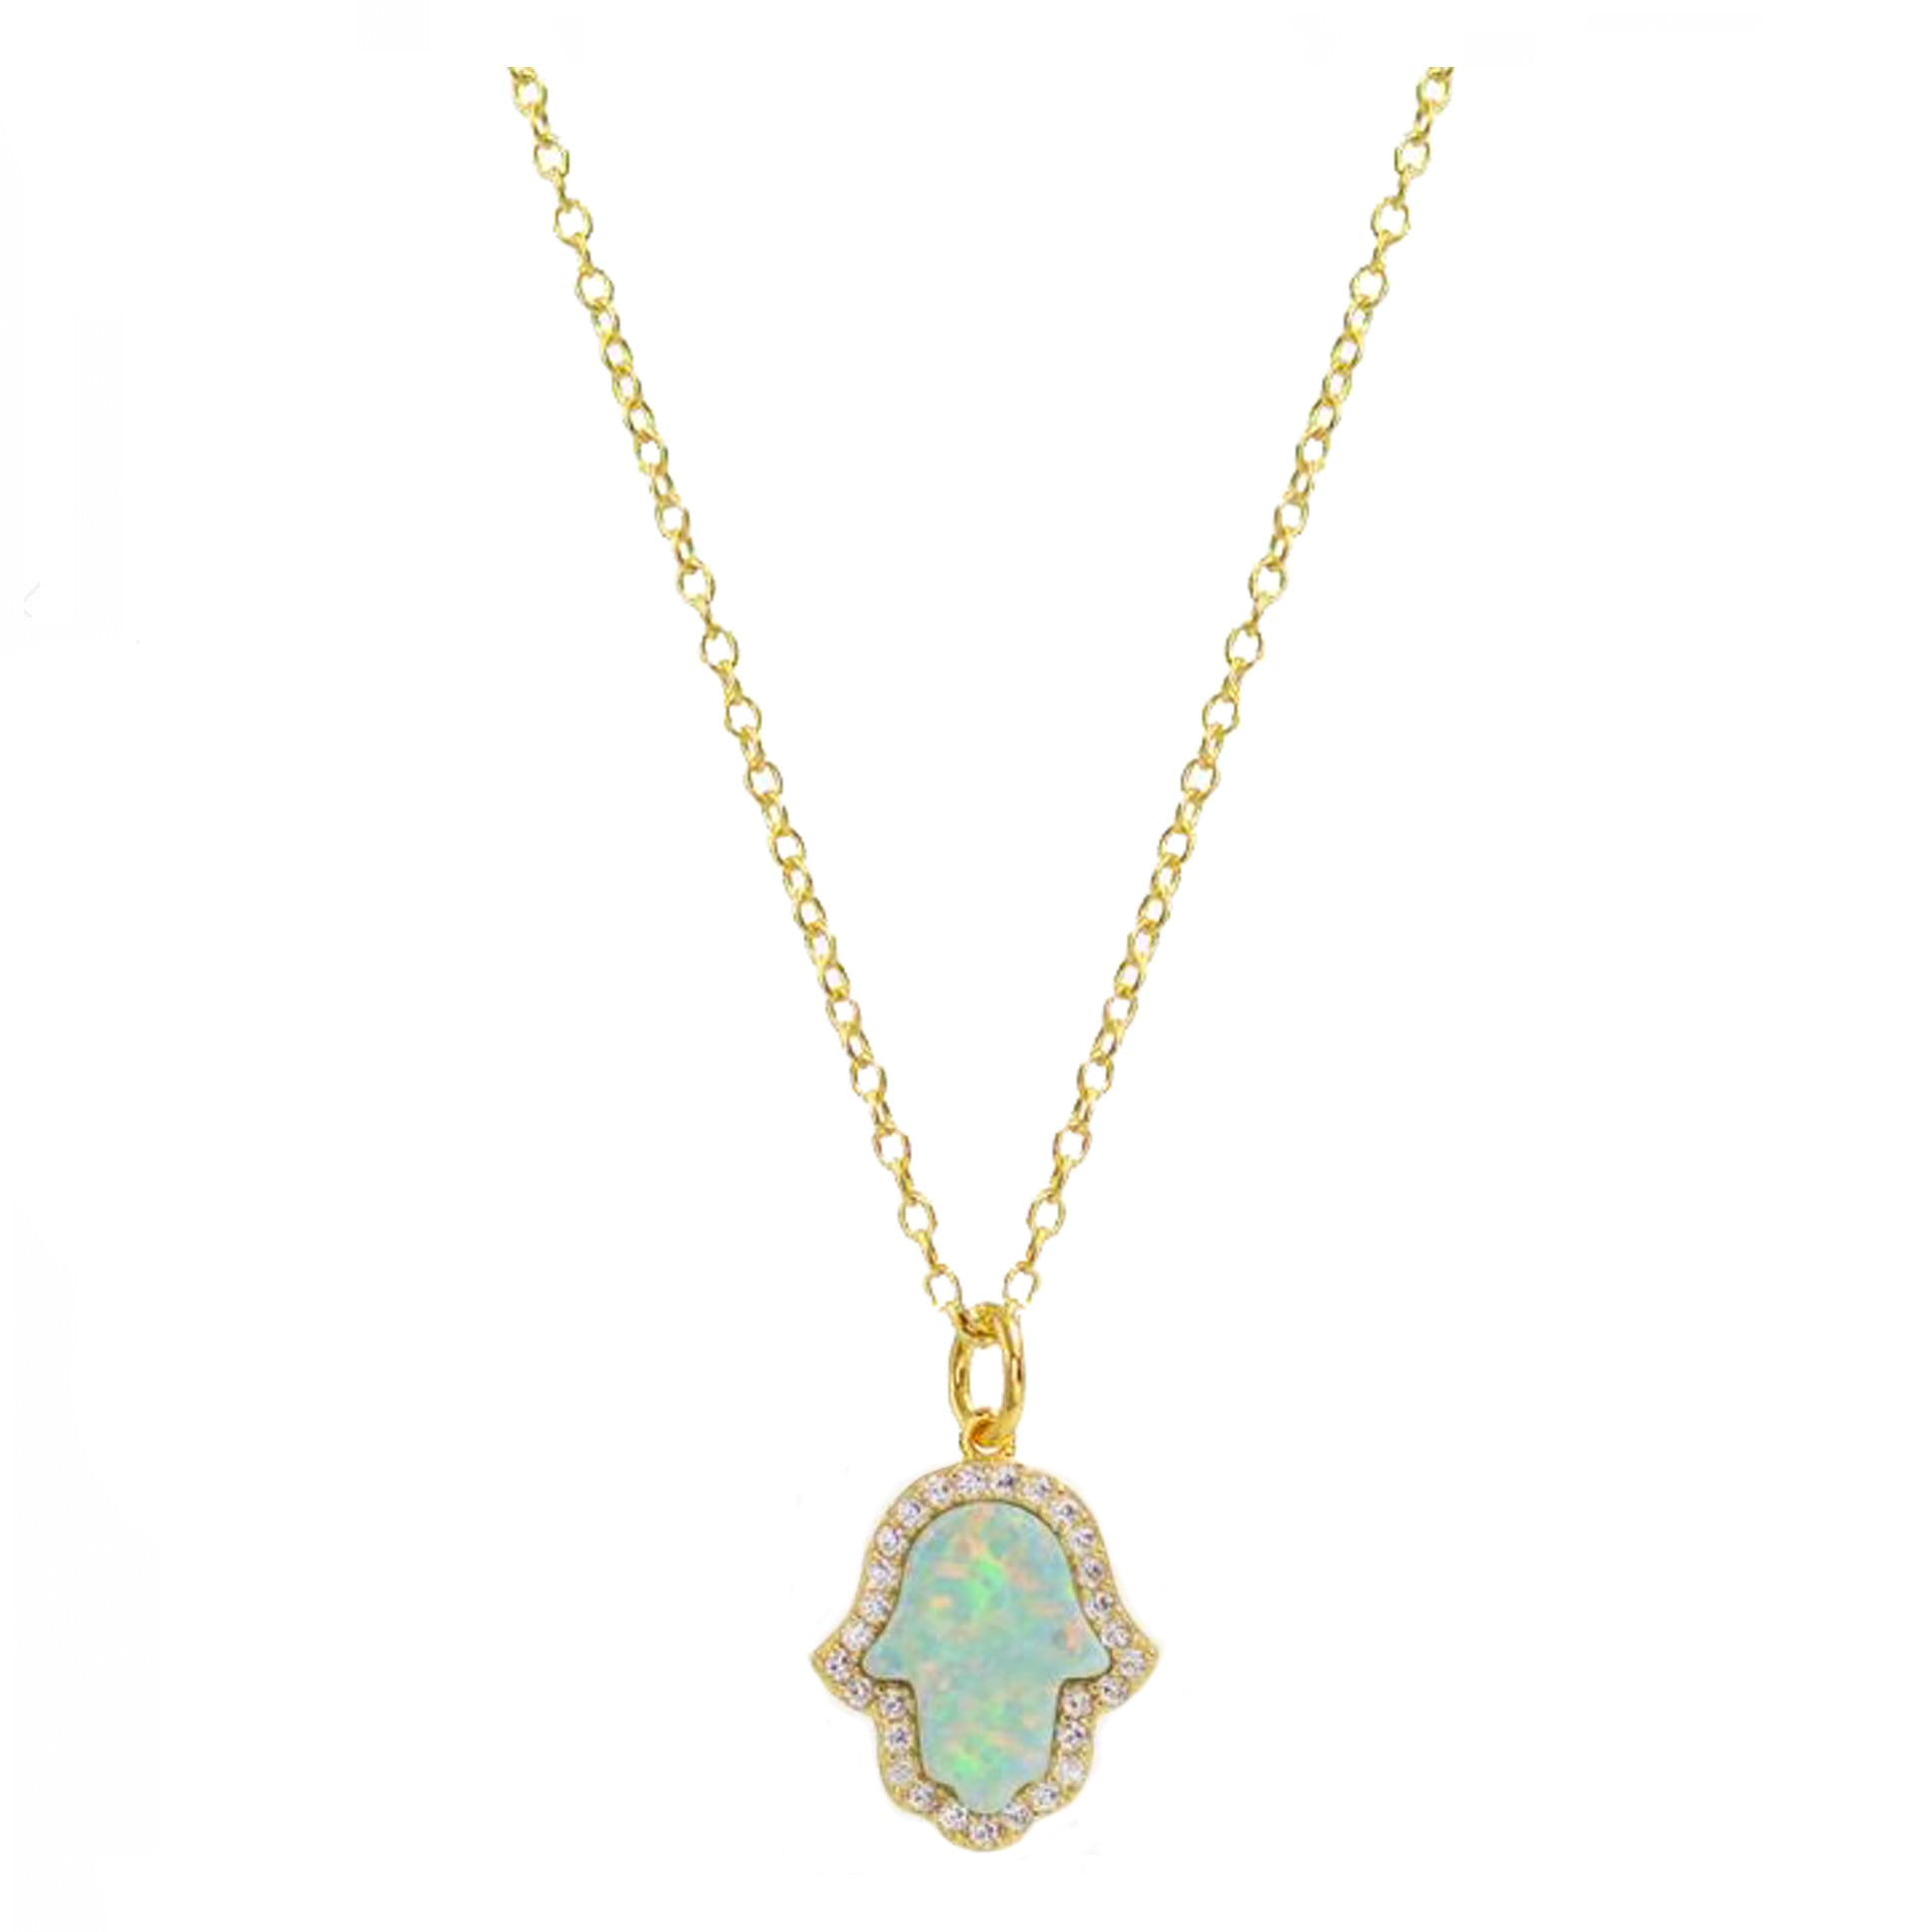 Opal Hamsa Necklace (Available in 4 Colors)